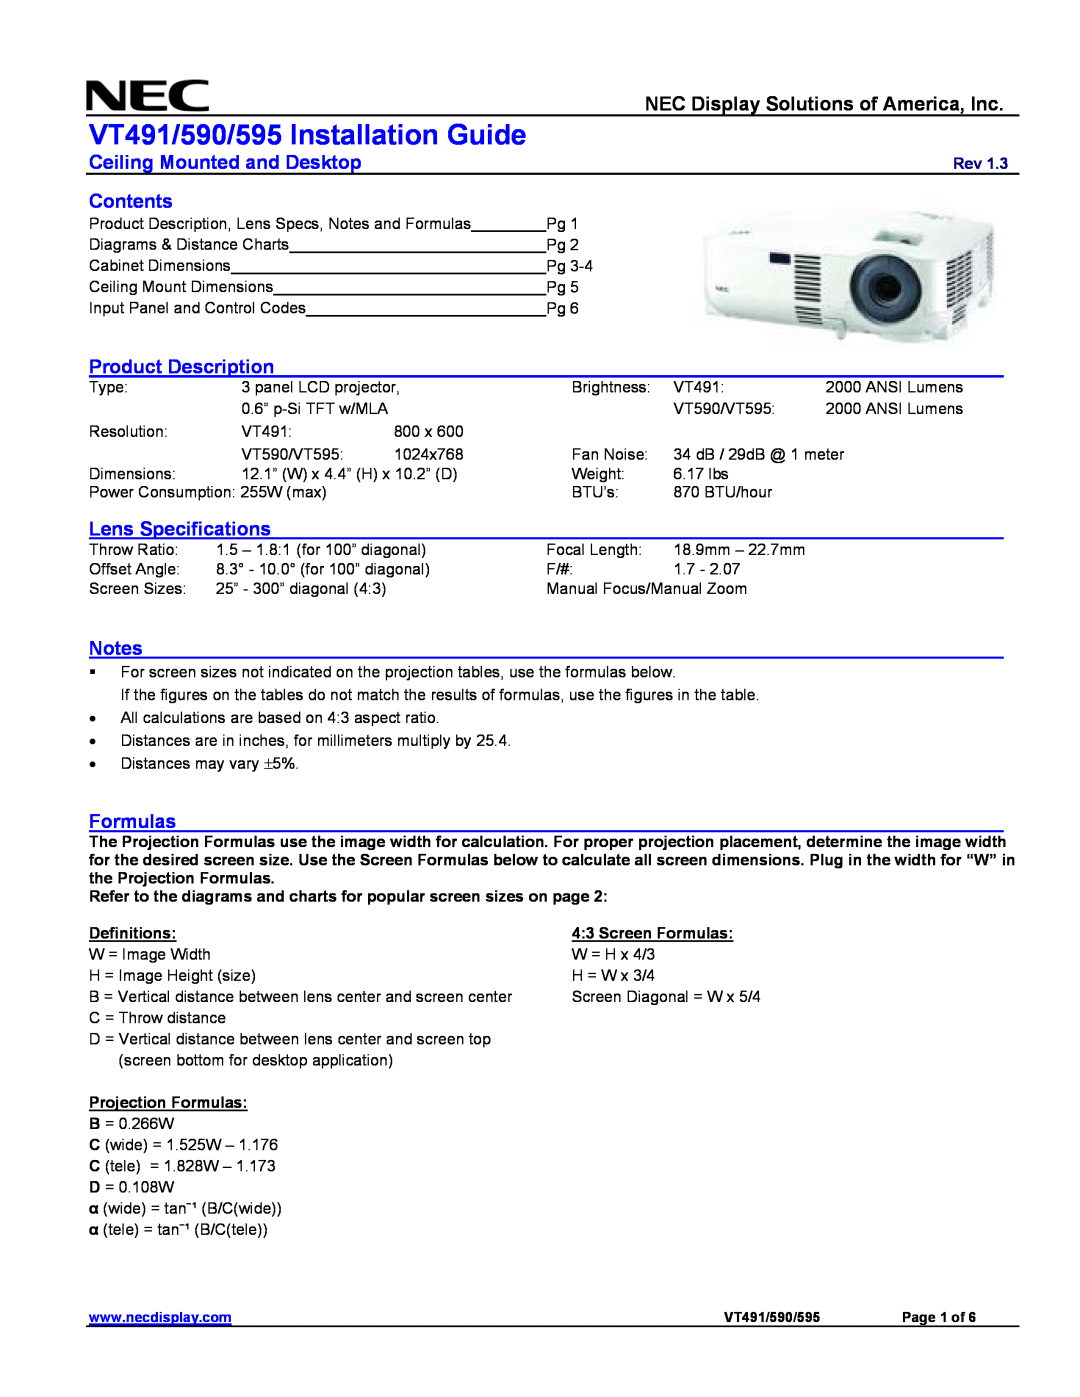 NEC specifications VT491/590/595 Installation Guide, NEC Display Solutions of America, Inc, Ceiling Mounted and Desktop 